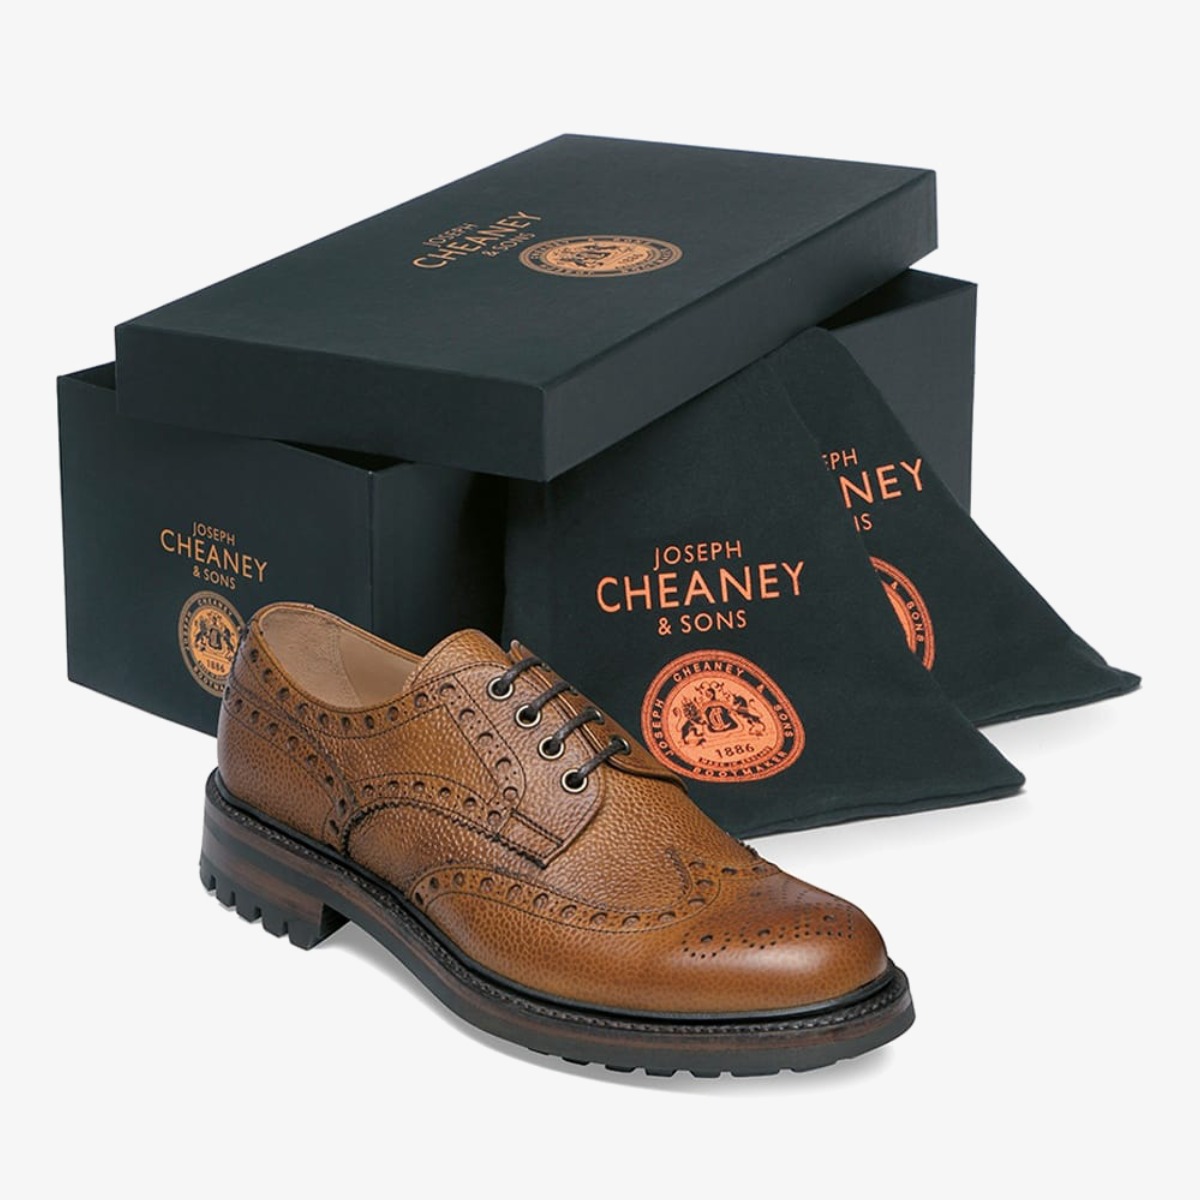 Cheaney Avon almond brogue derby shoes